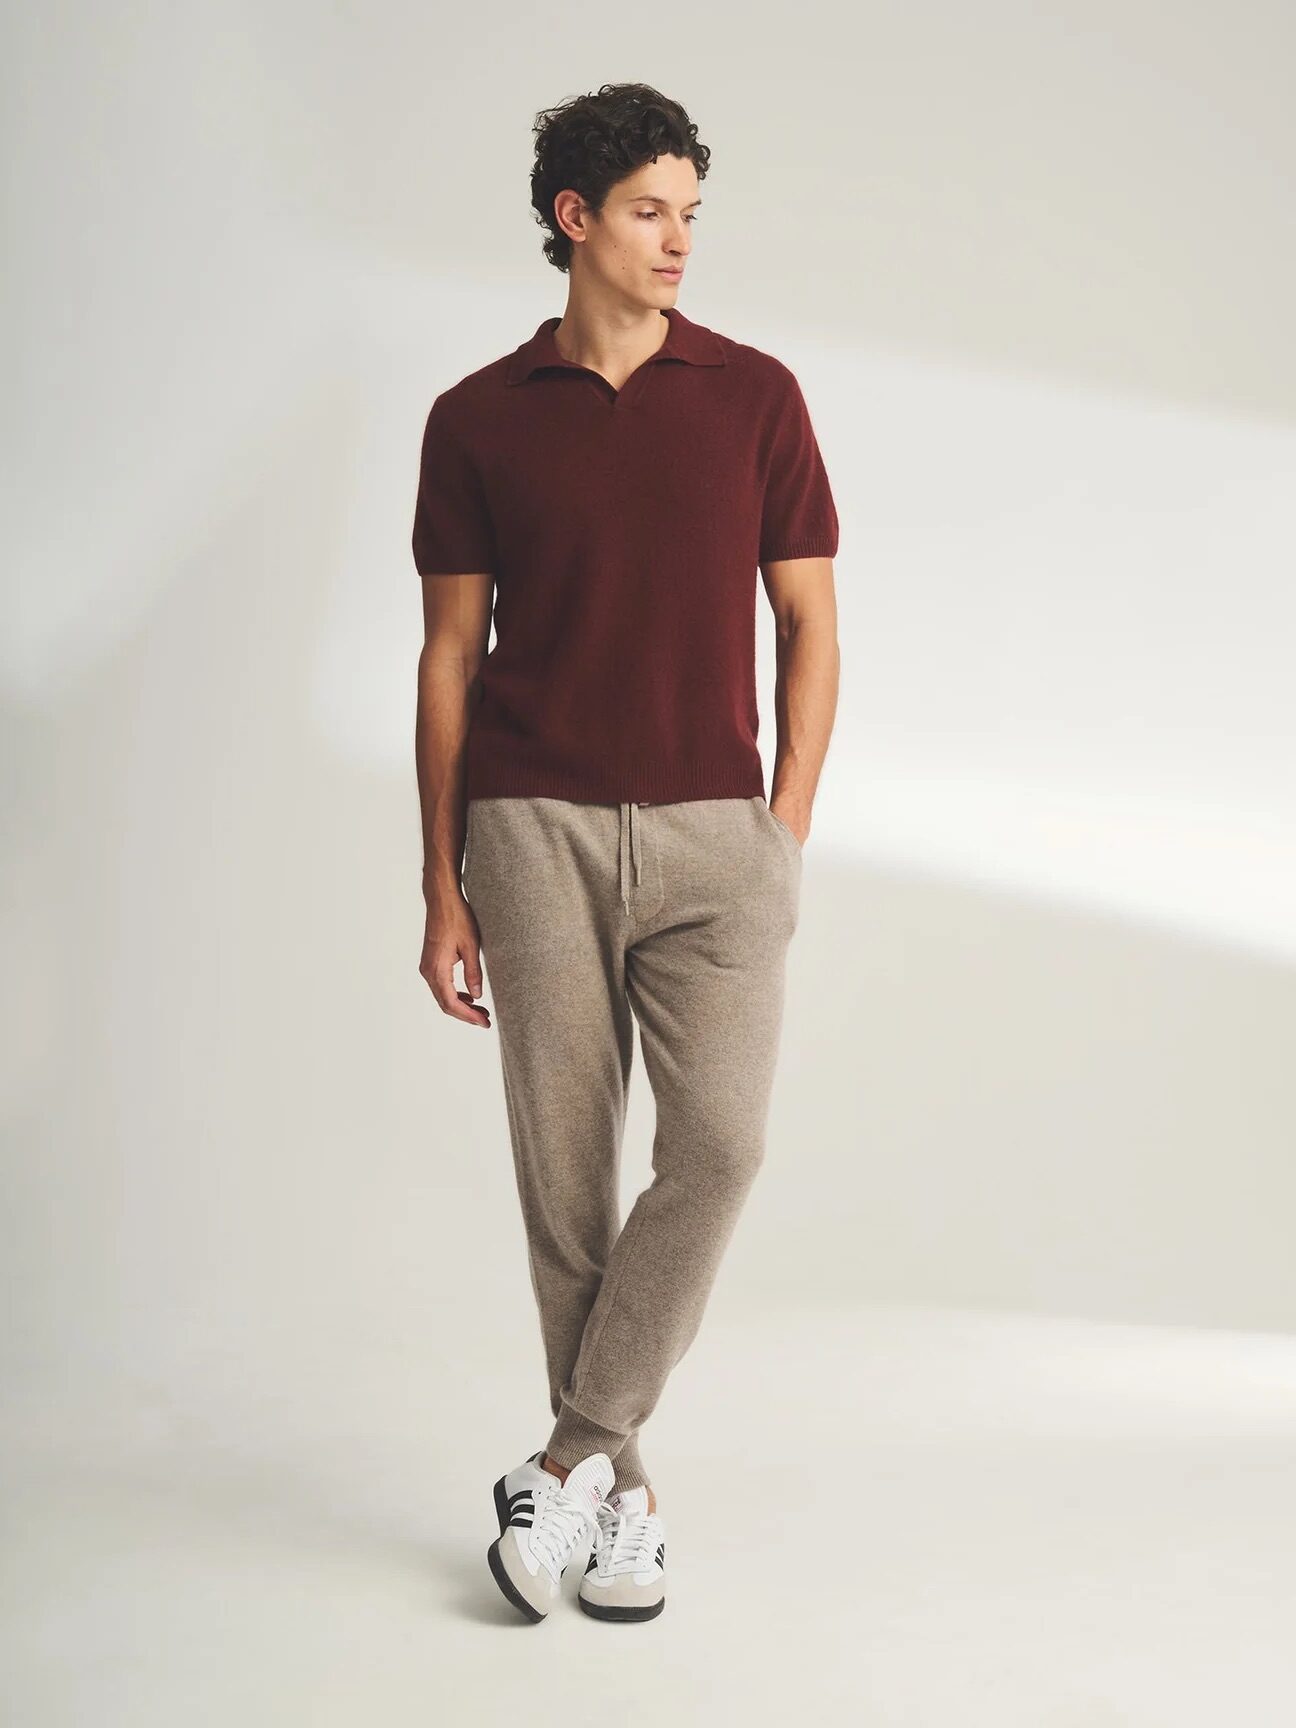 A man stands in a studio, wearing a burgundy polo shirt, grey trousers, and white sneakers, looking to his right with a neutral expression.